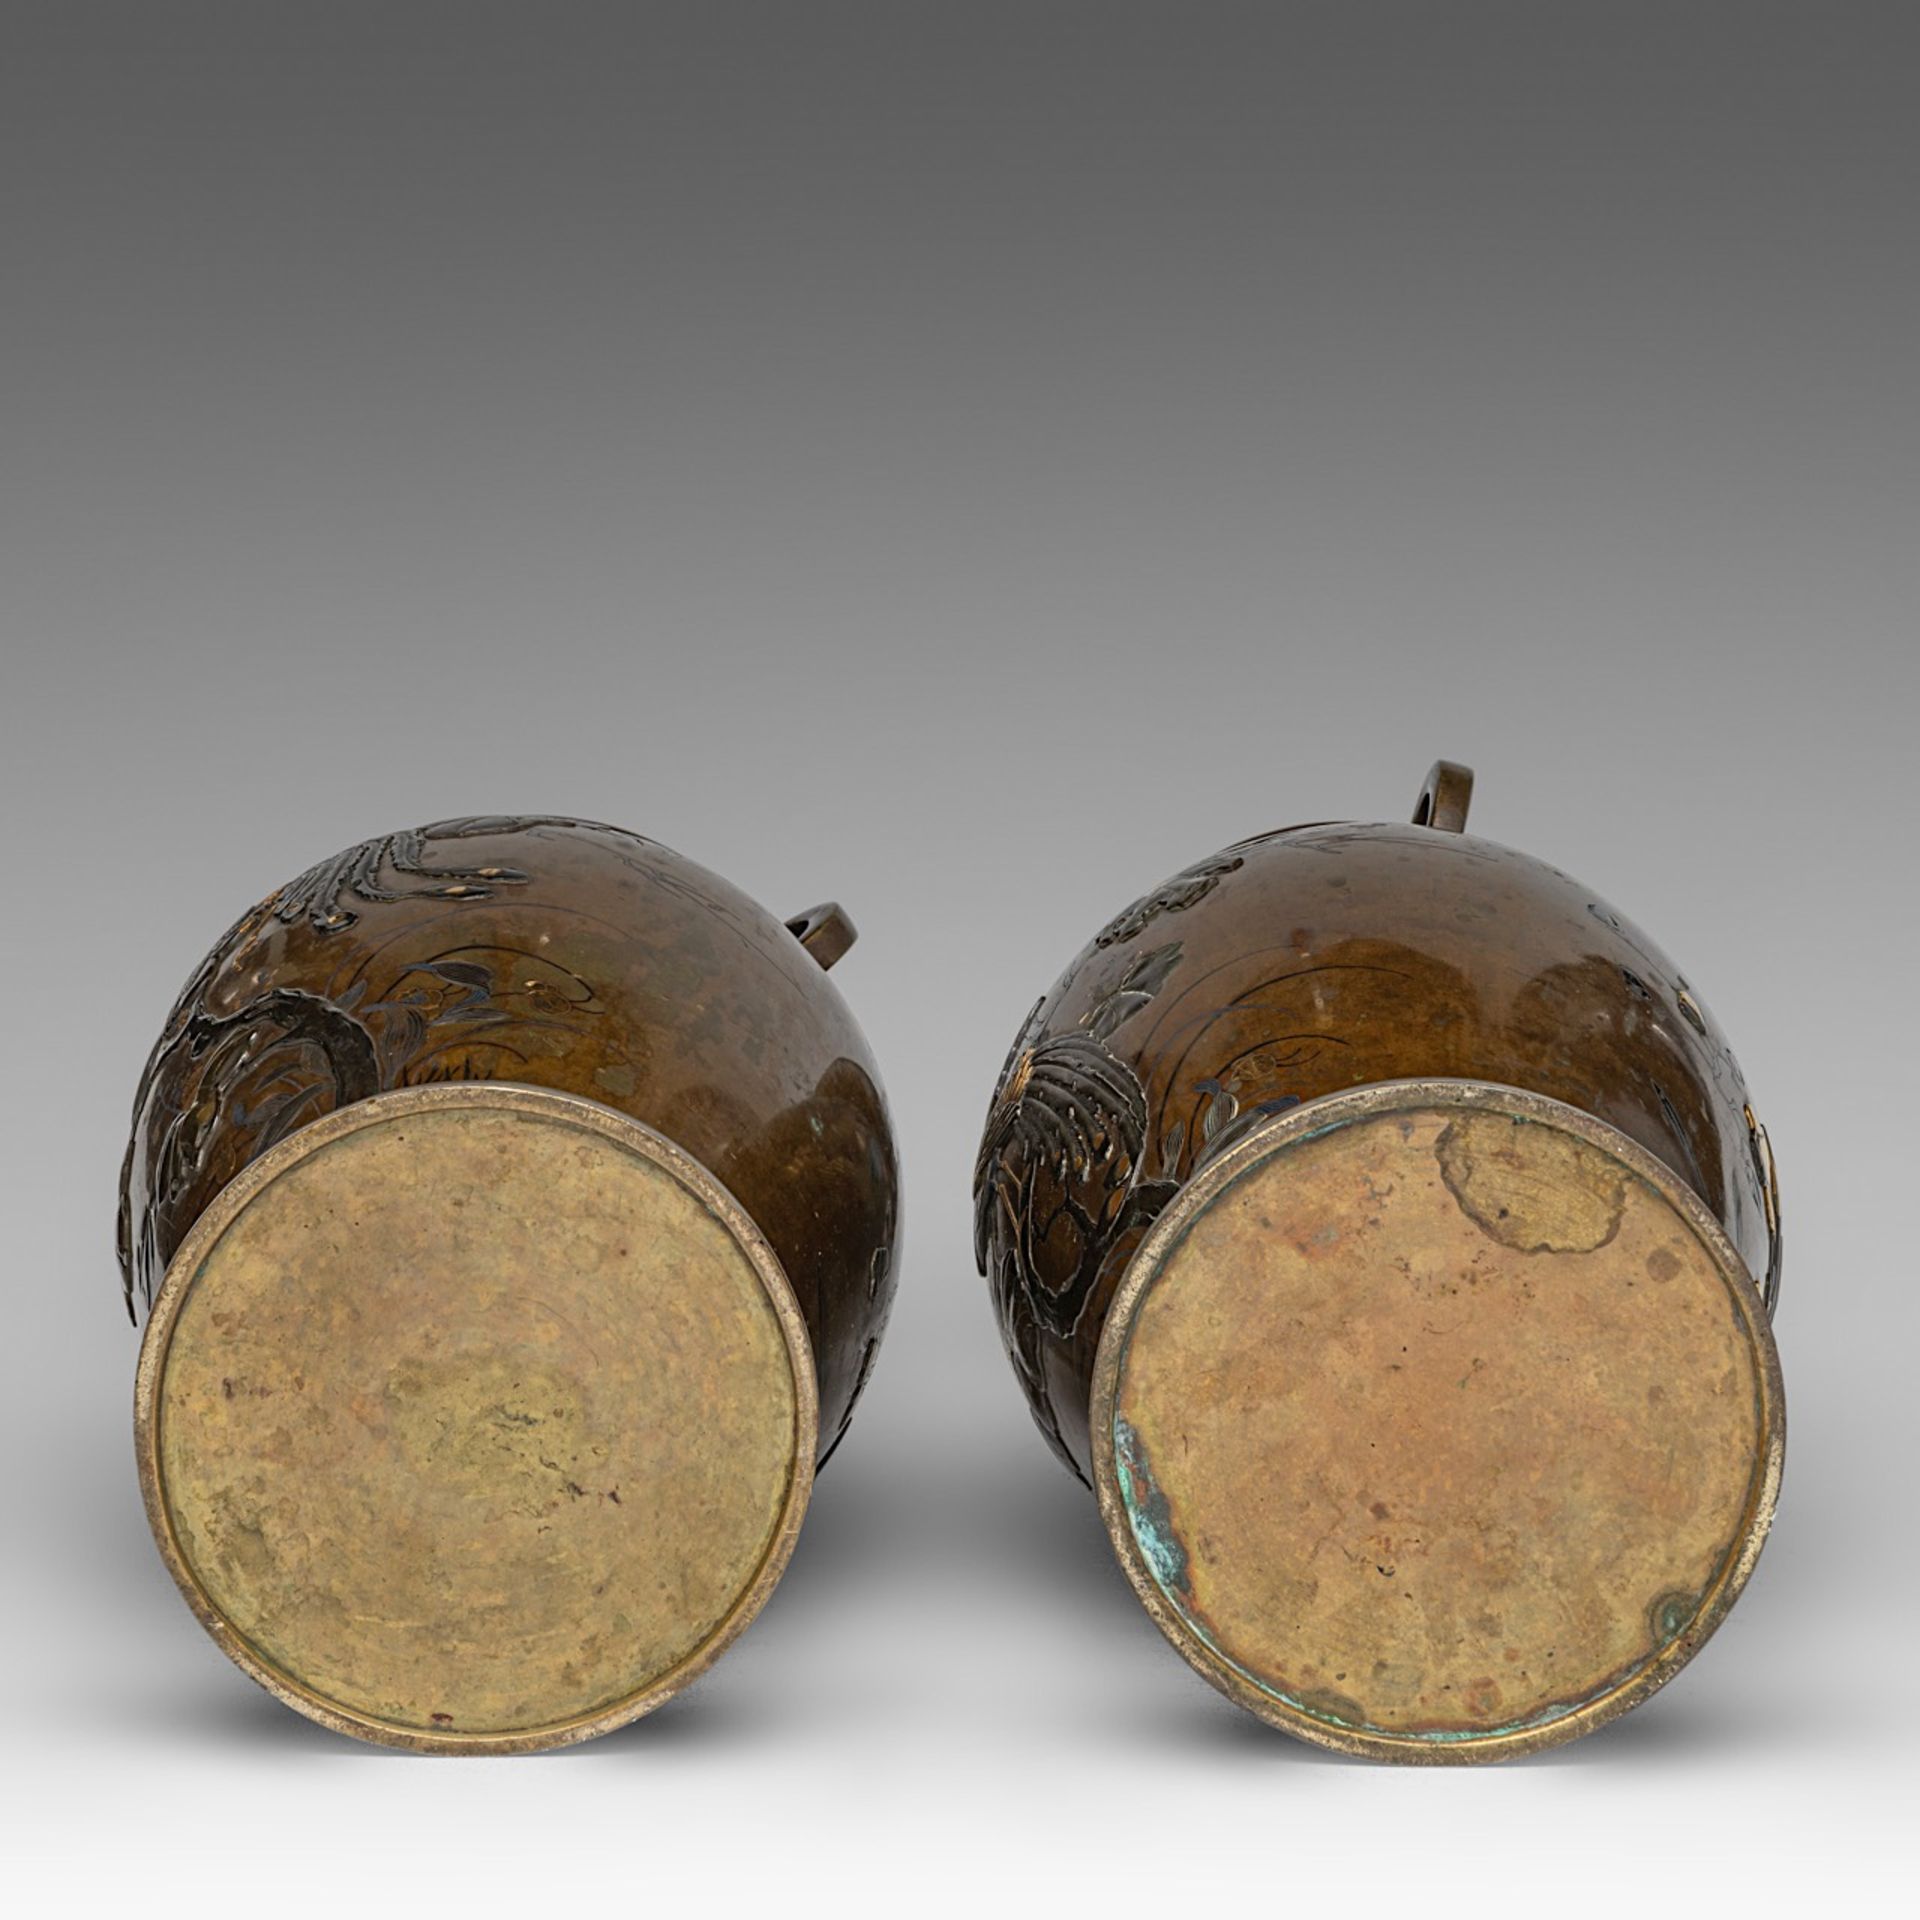 A pair of Japanese bronze 'Phoenix' vases with gilt details, Meiji period (1868-1912), both H 41,5 c - Image 6 of 6